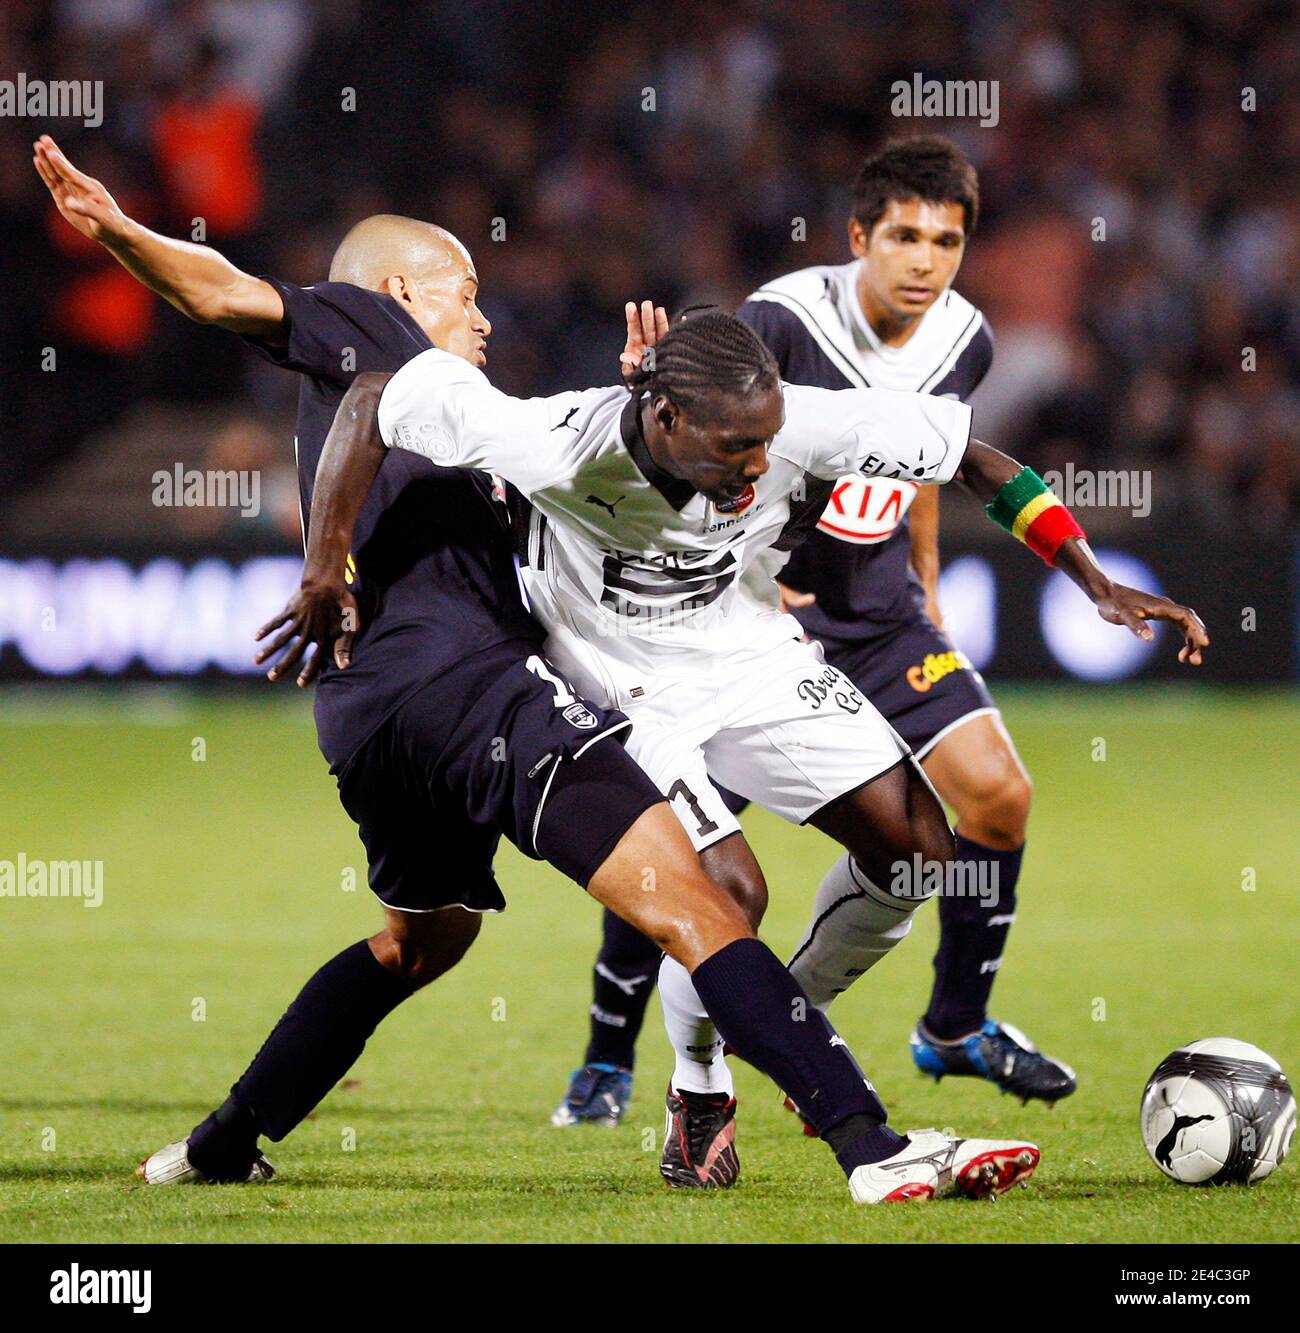 Bordeaux's Wendel and Rennes' Ismael Bangoura battle for the ball during  the French First League Soccer match, Girondins de Bordeaux vs Stade Rennais  at Chaban Delmas stadium in Bordeaux, France on September